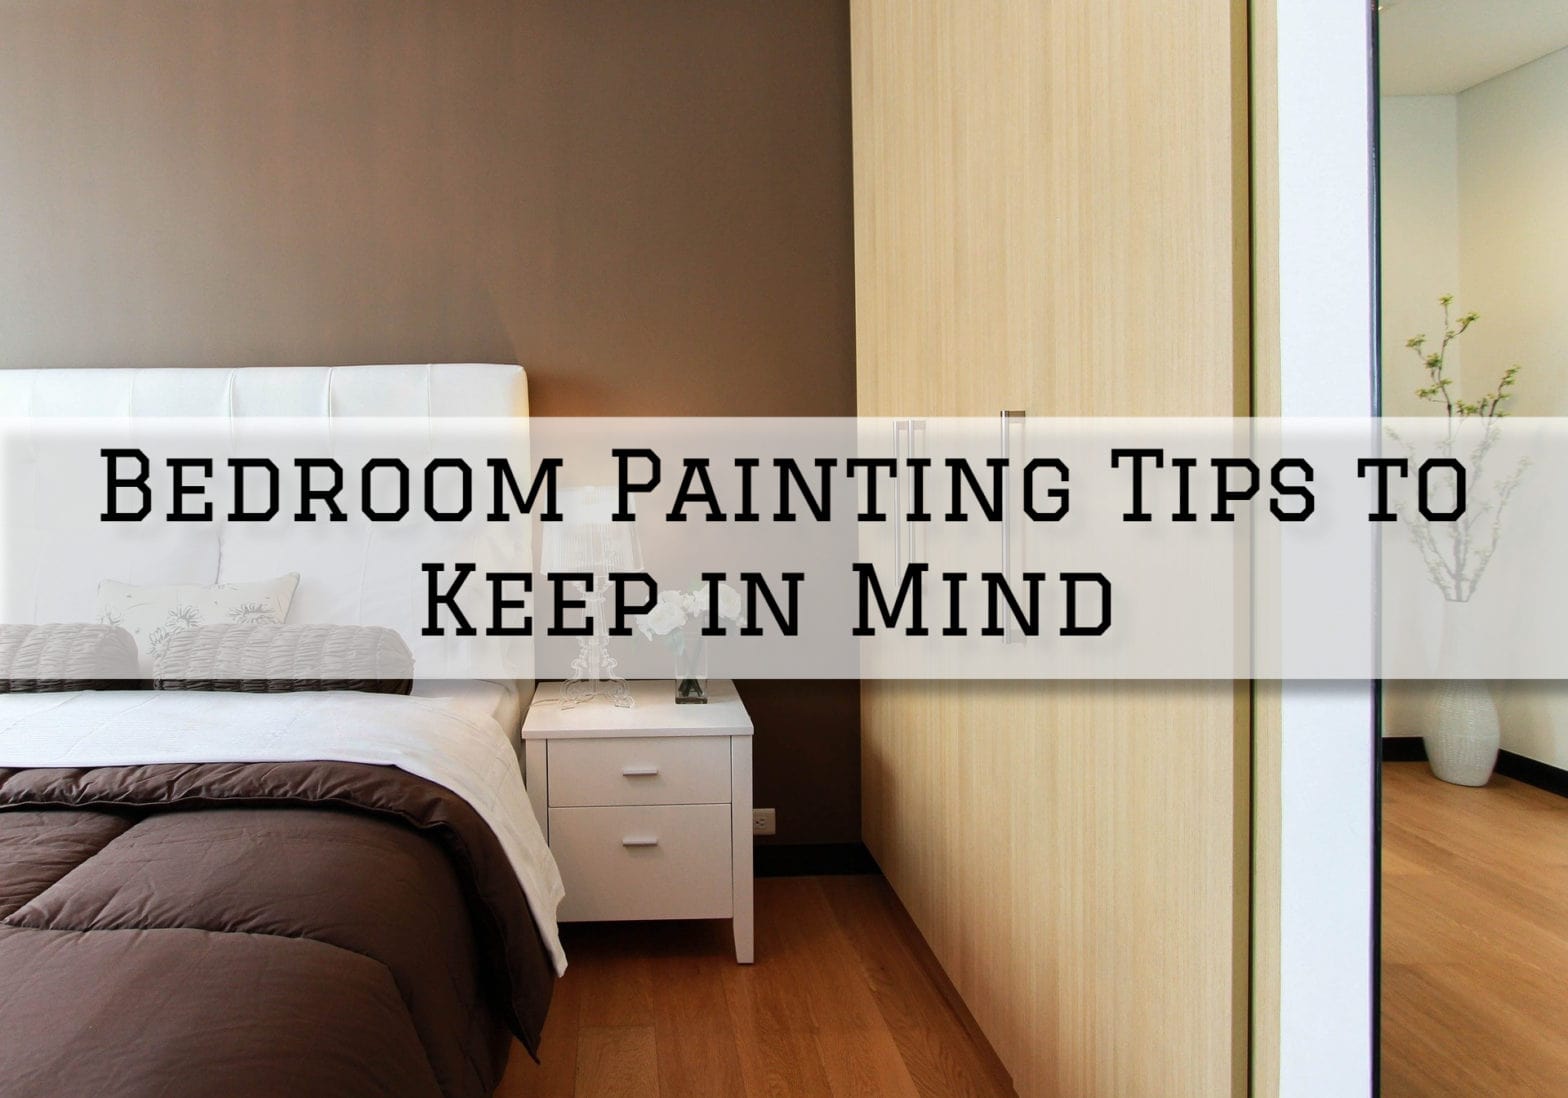 2022-04-01 Painting and Wallpapering Inc Hamilton, Ontario Bedroom Painting Tips to Keep in Mind